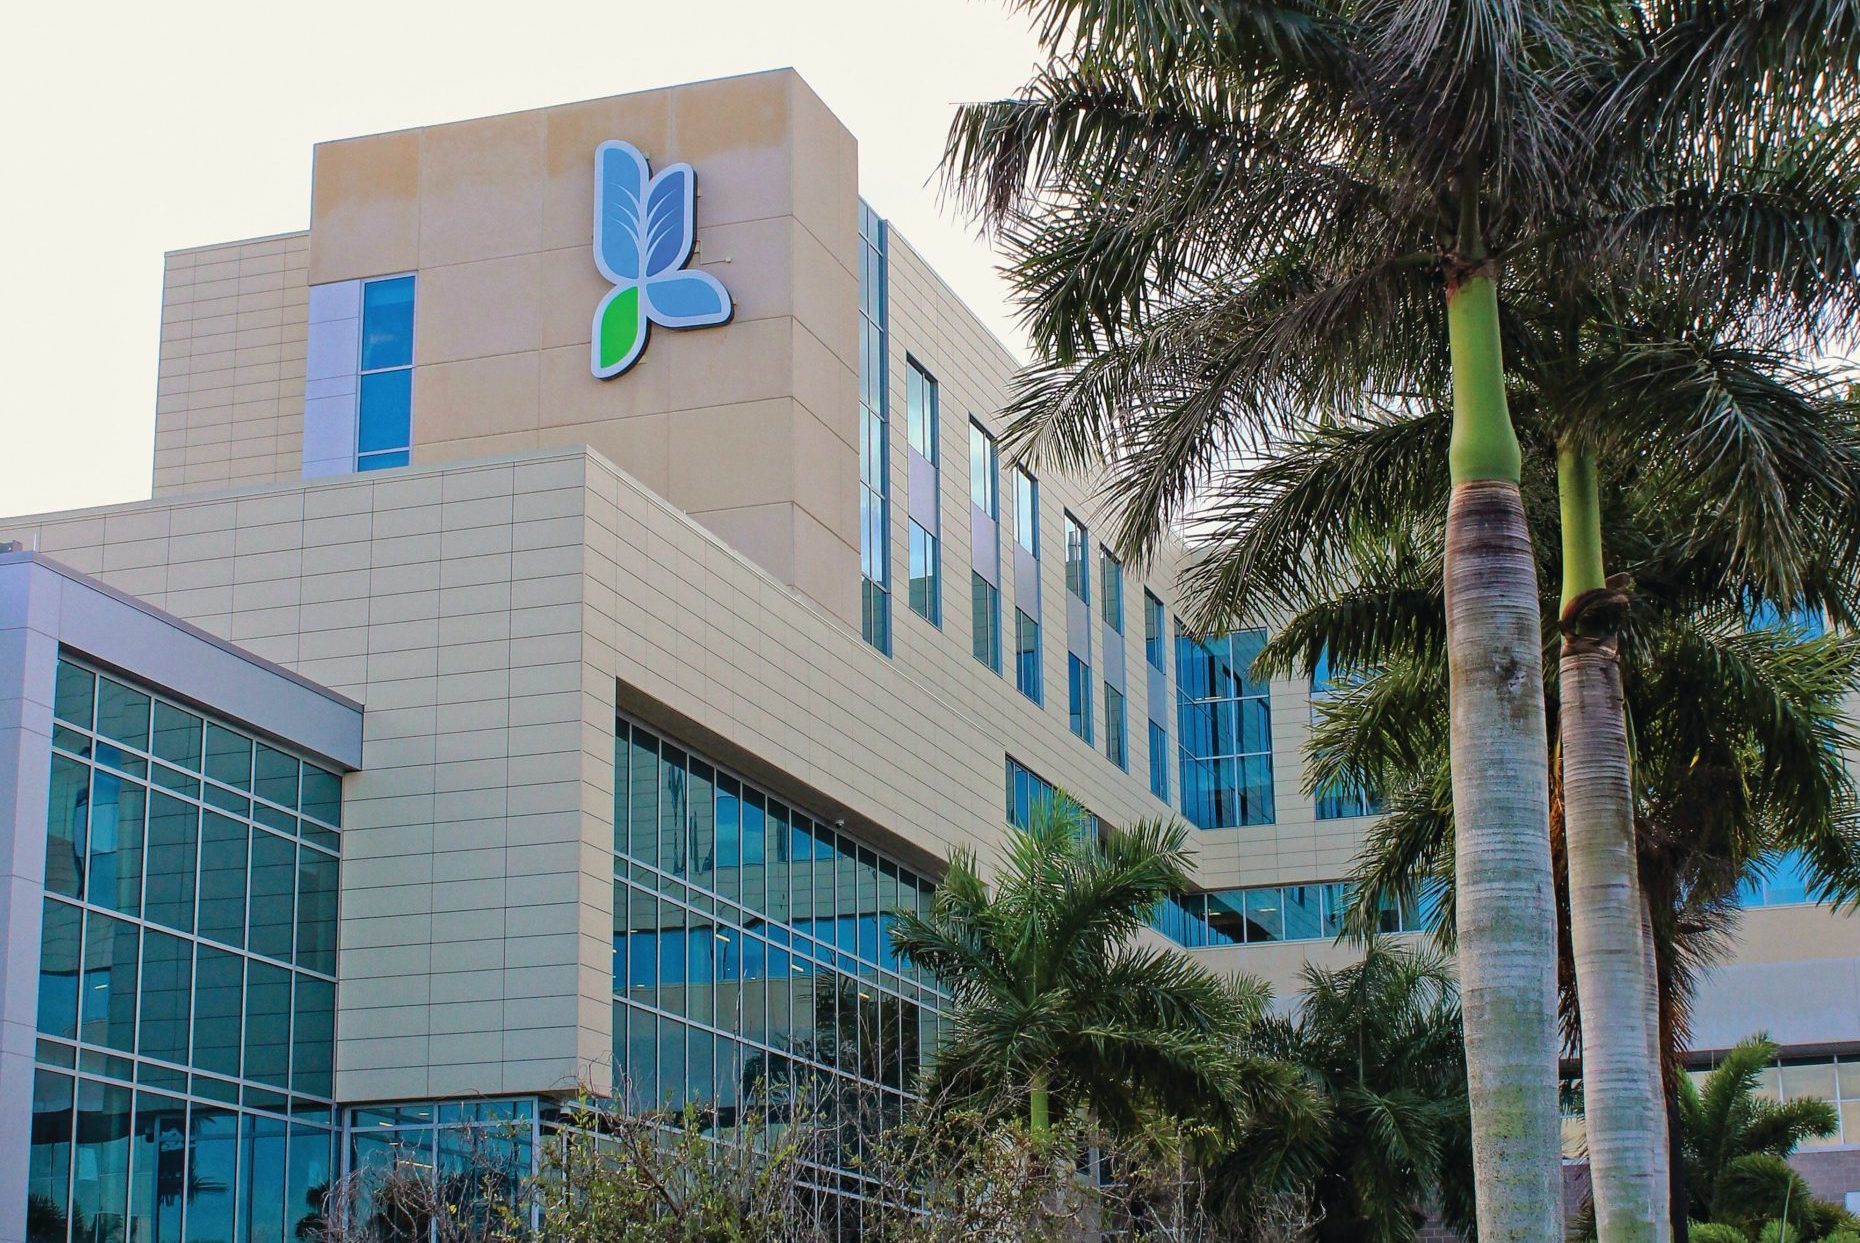 . News rates Lee Health hospitals as high performing - Gulfshore Business